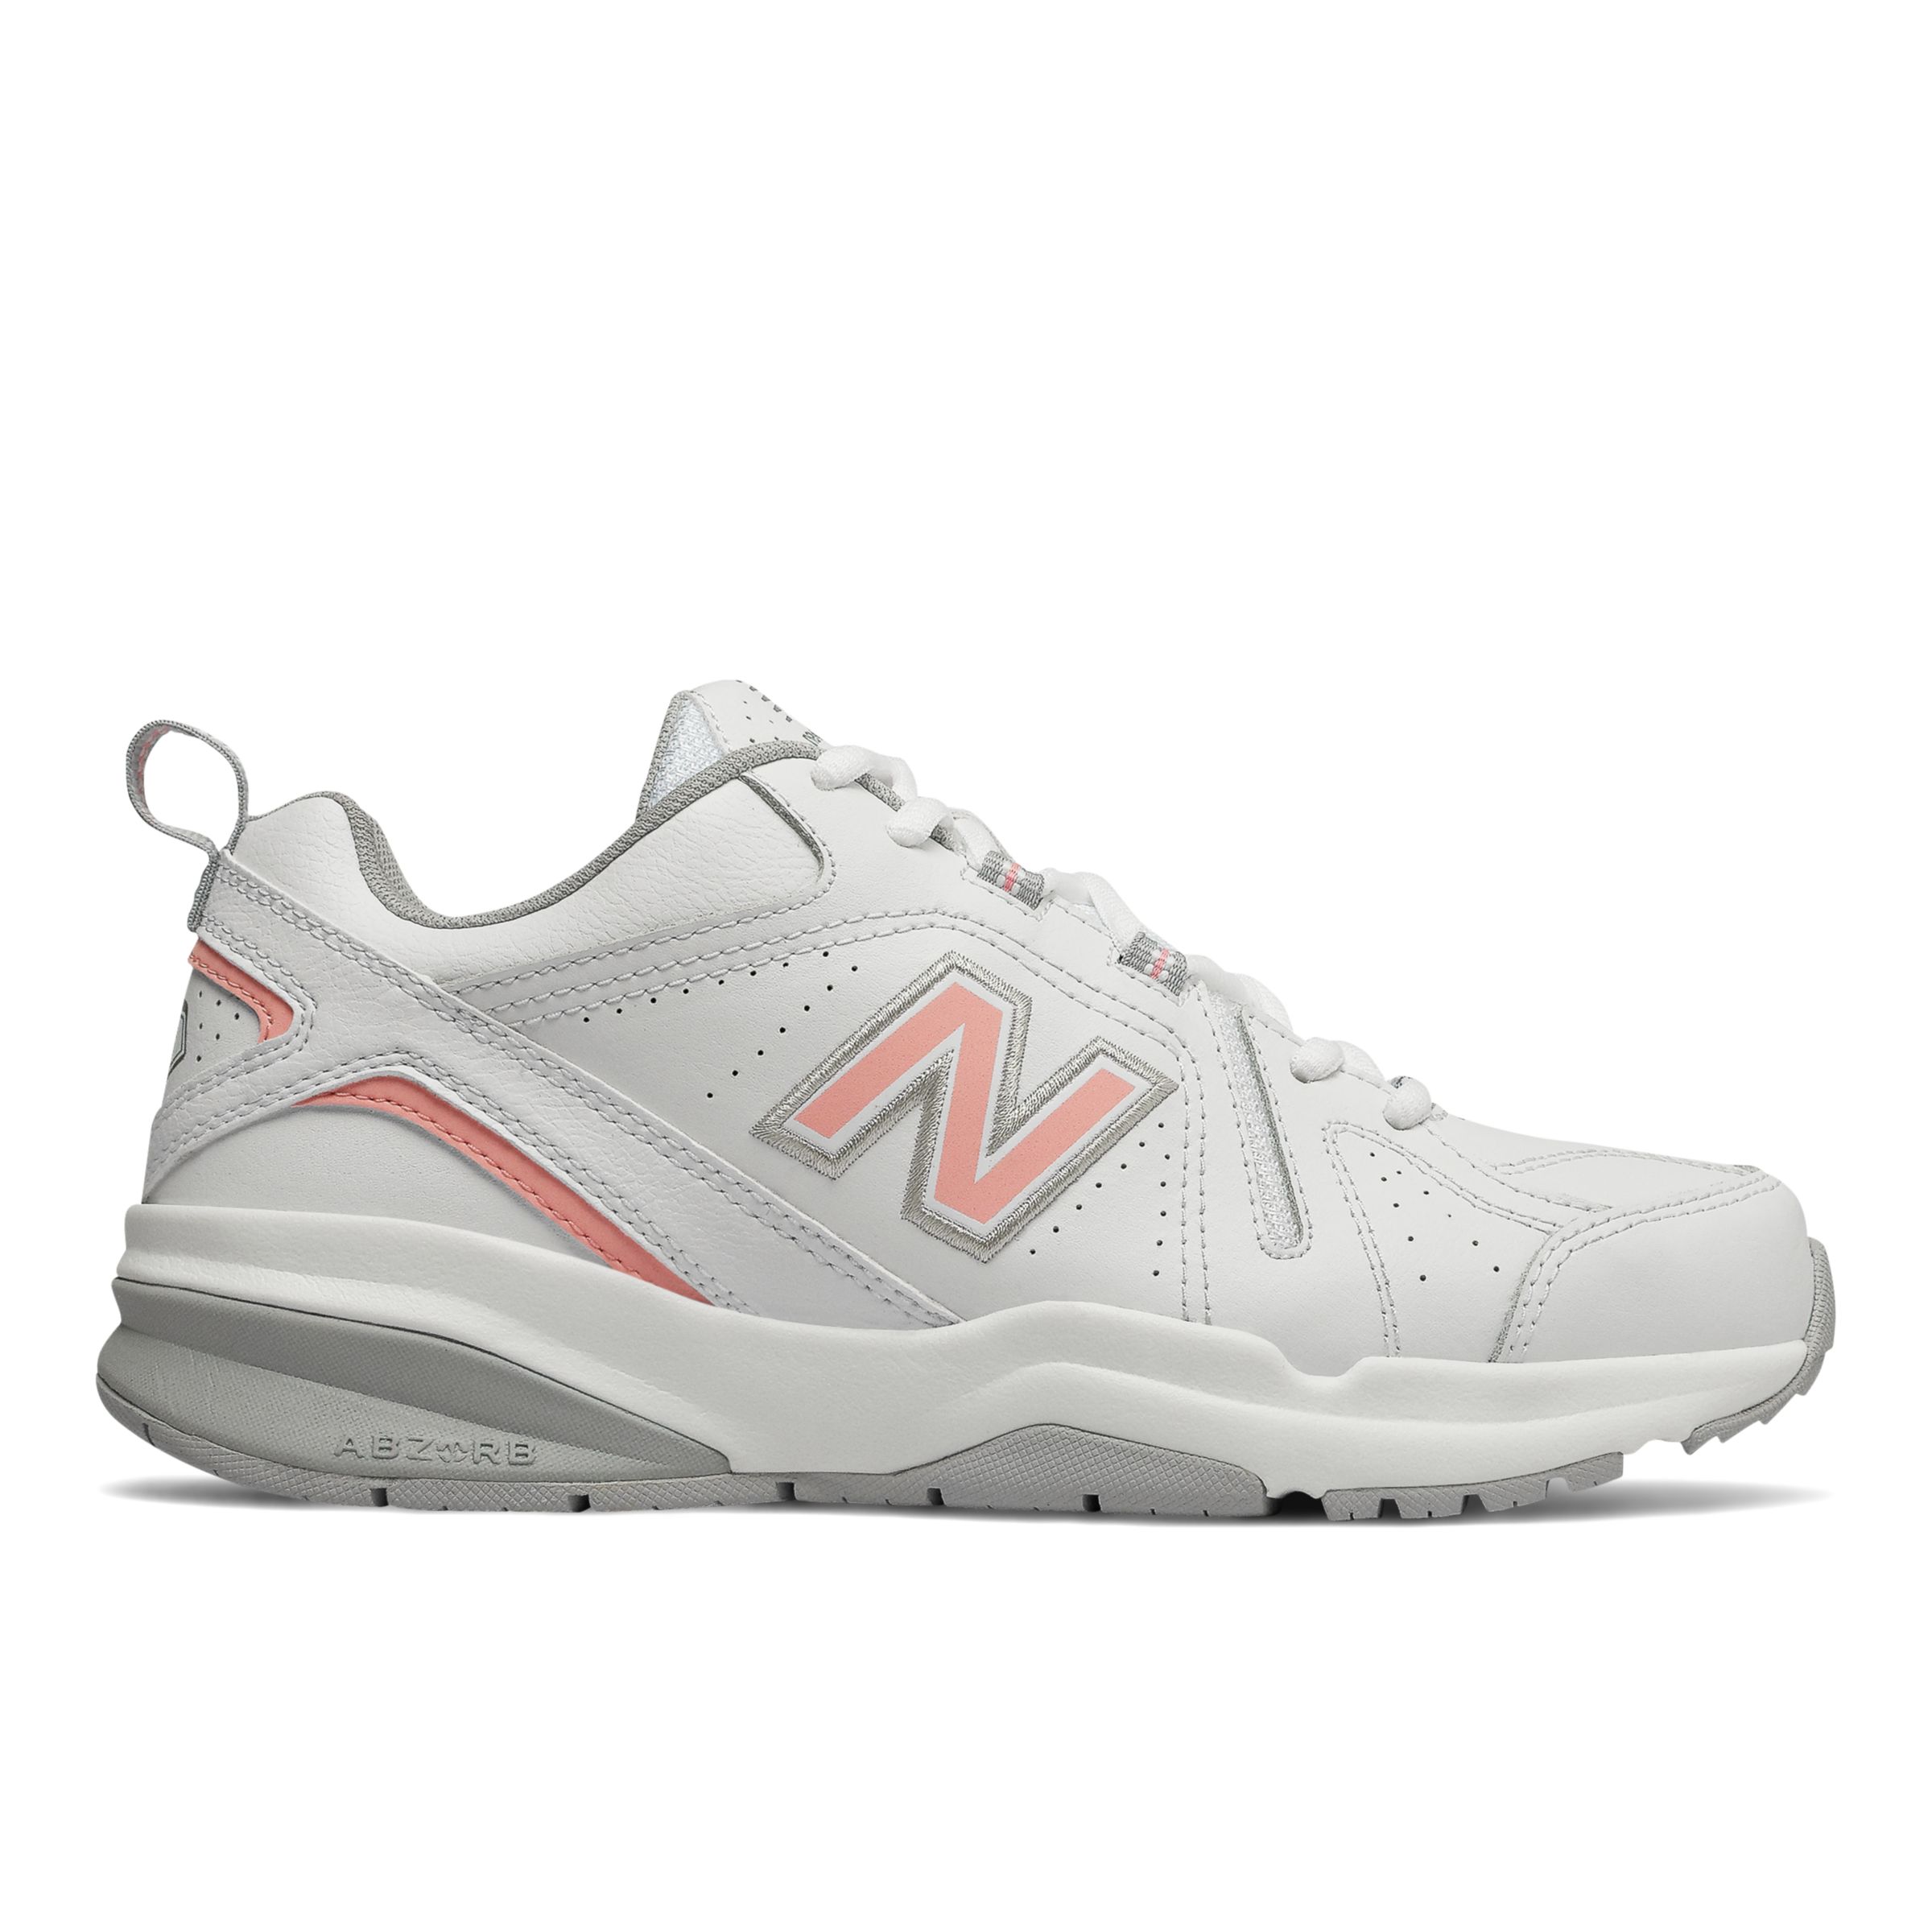 Women's 608v5, White with Pink